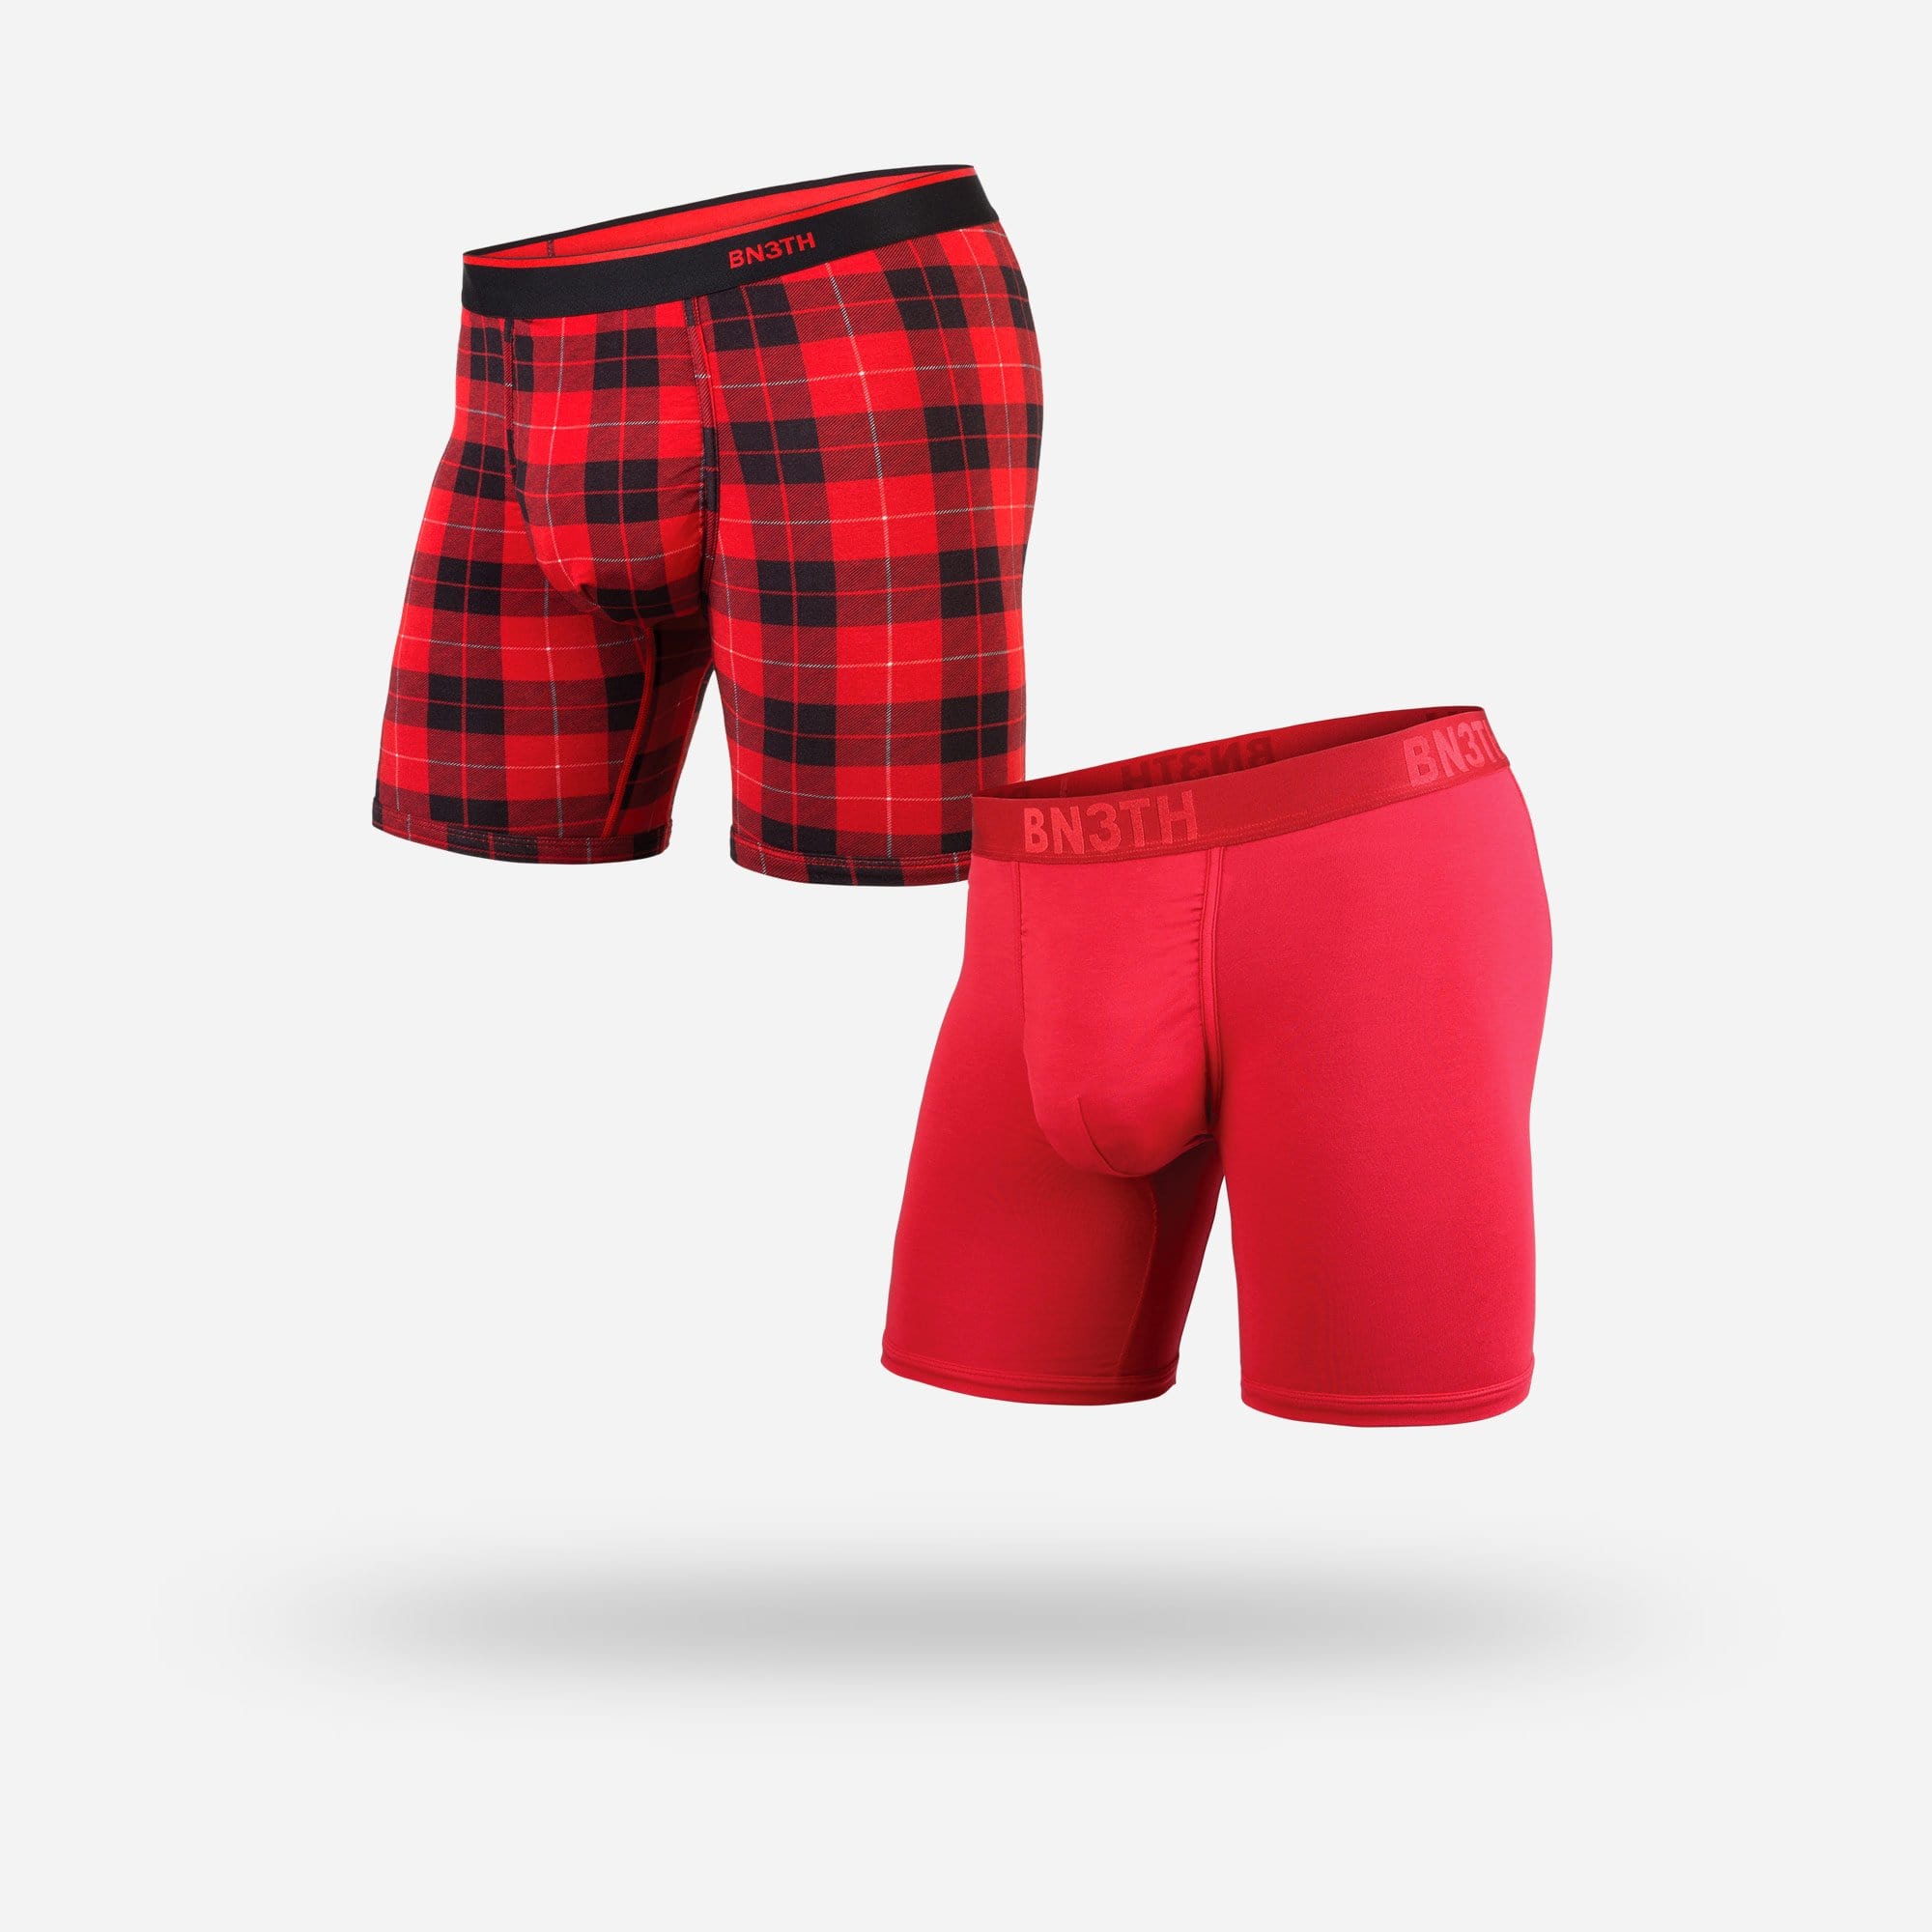 BN3TH Men's Print Classic Trunk (Fireside Plaid Red, Small) 